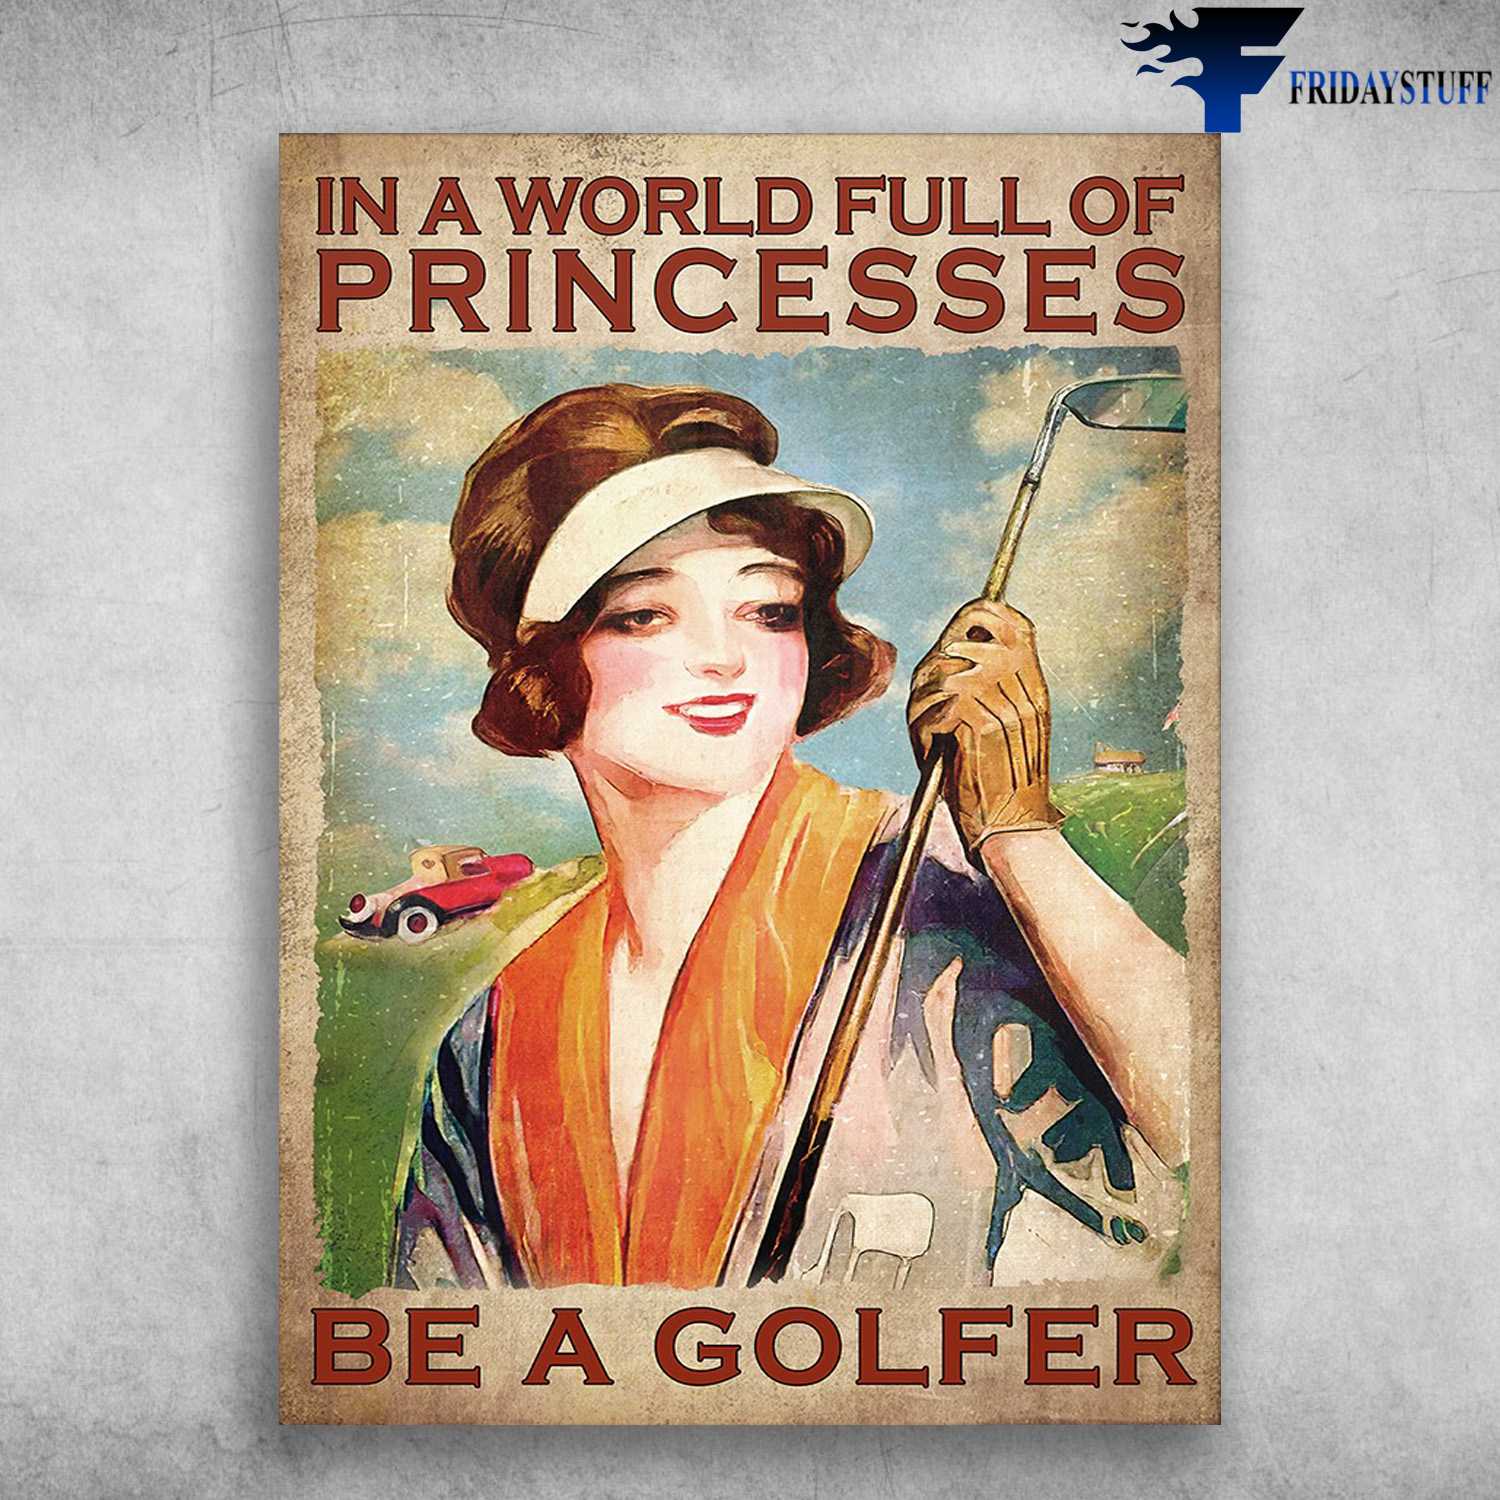 Girl Plays Golf, Golf Lover - In A World Full Of Princesses, Be A Golfer